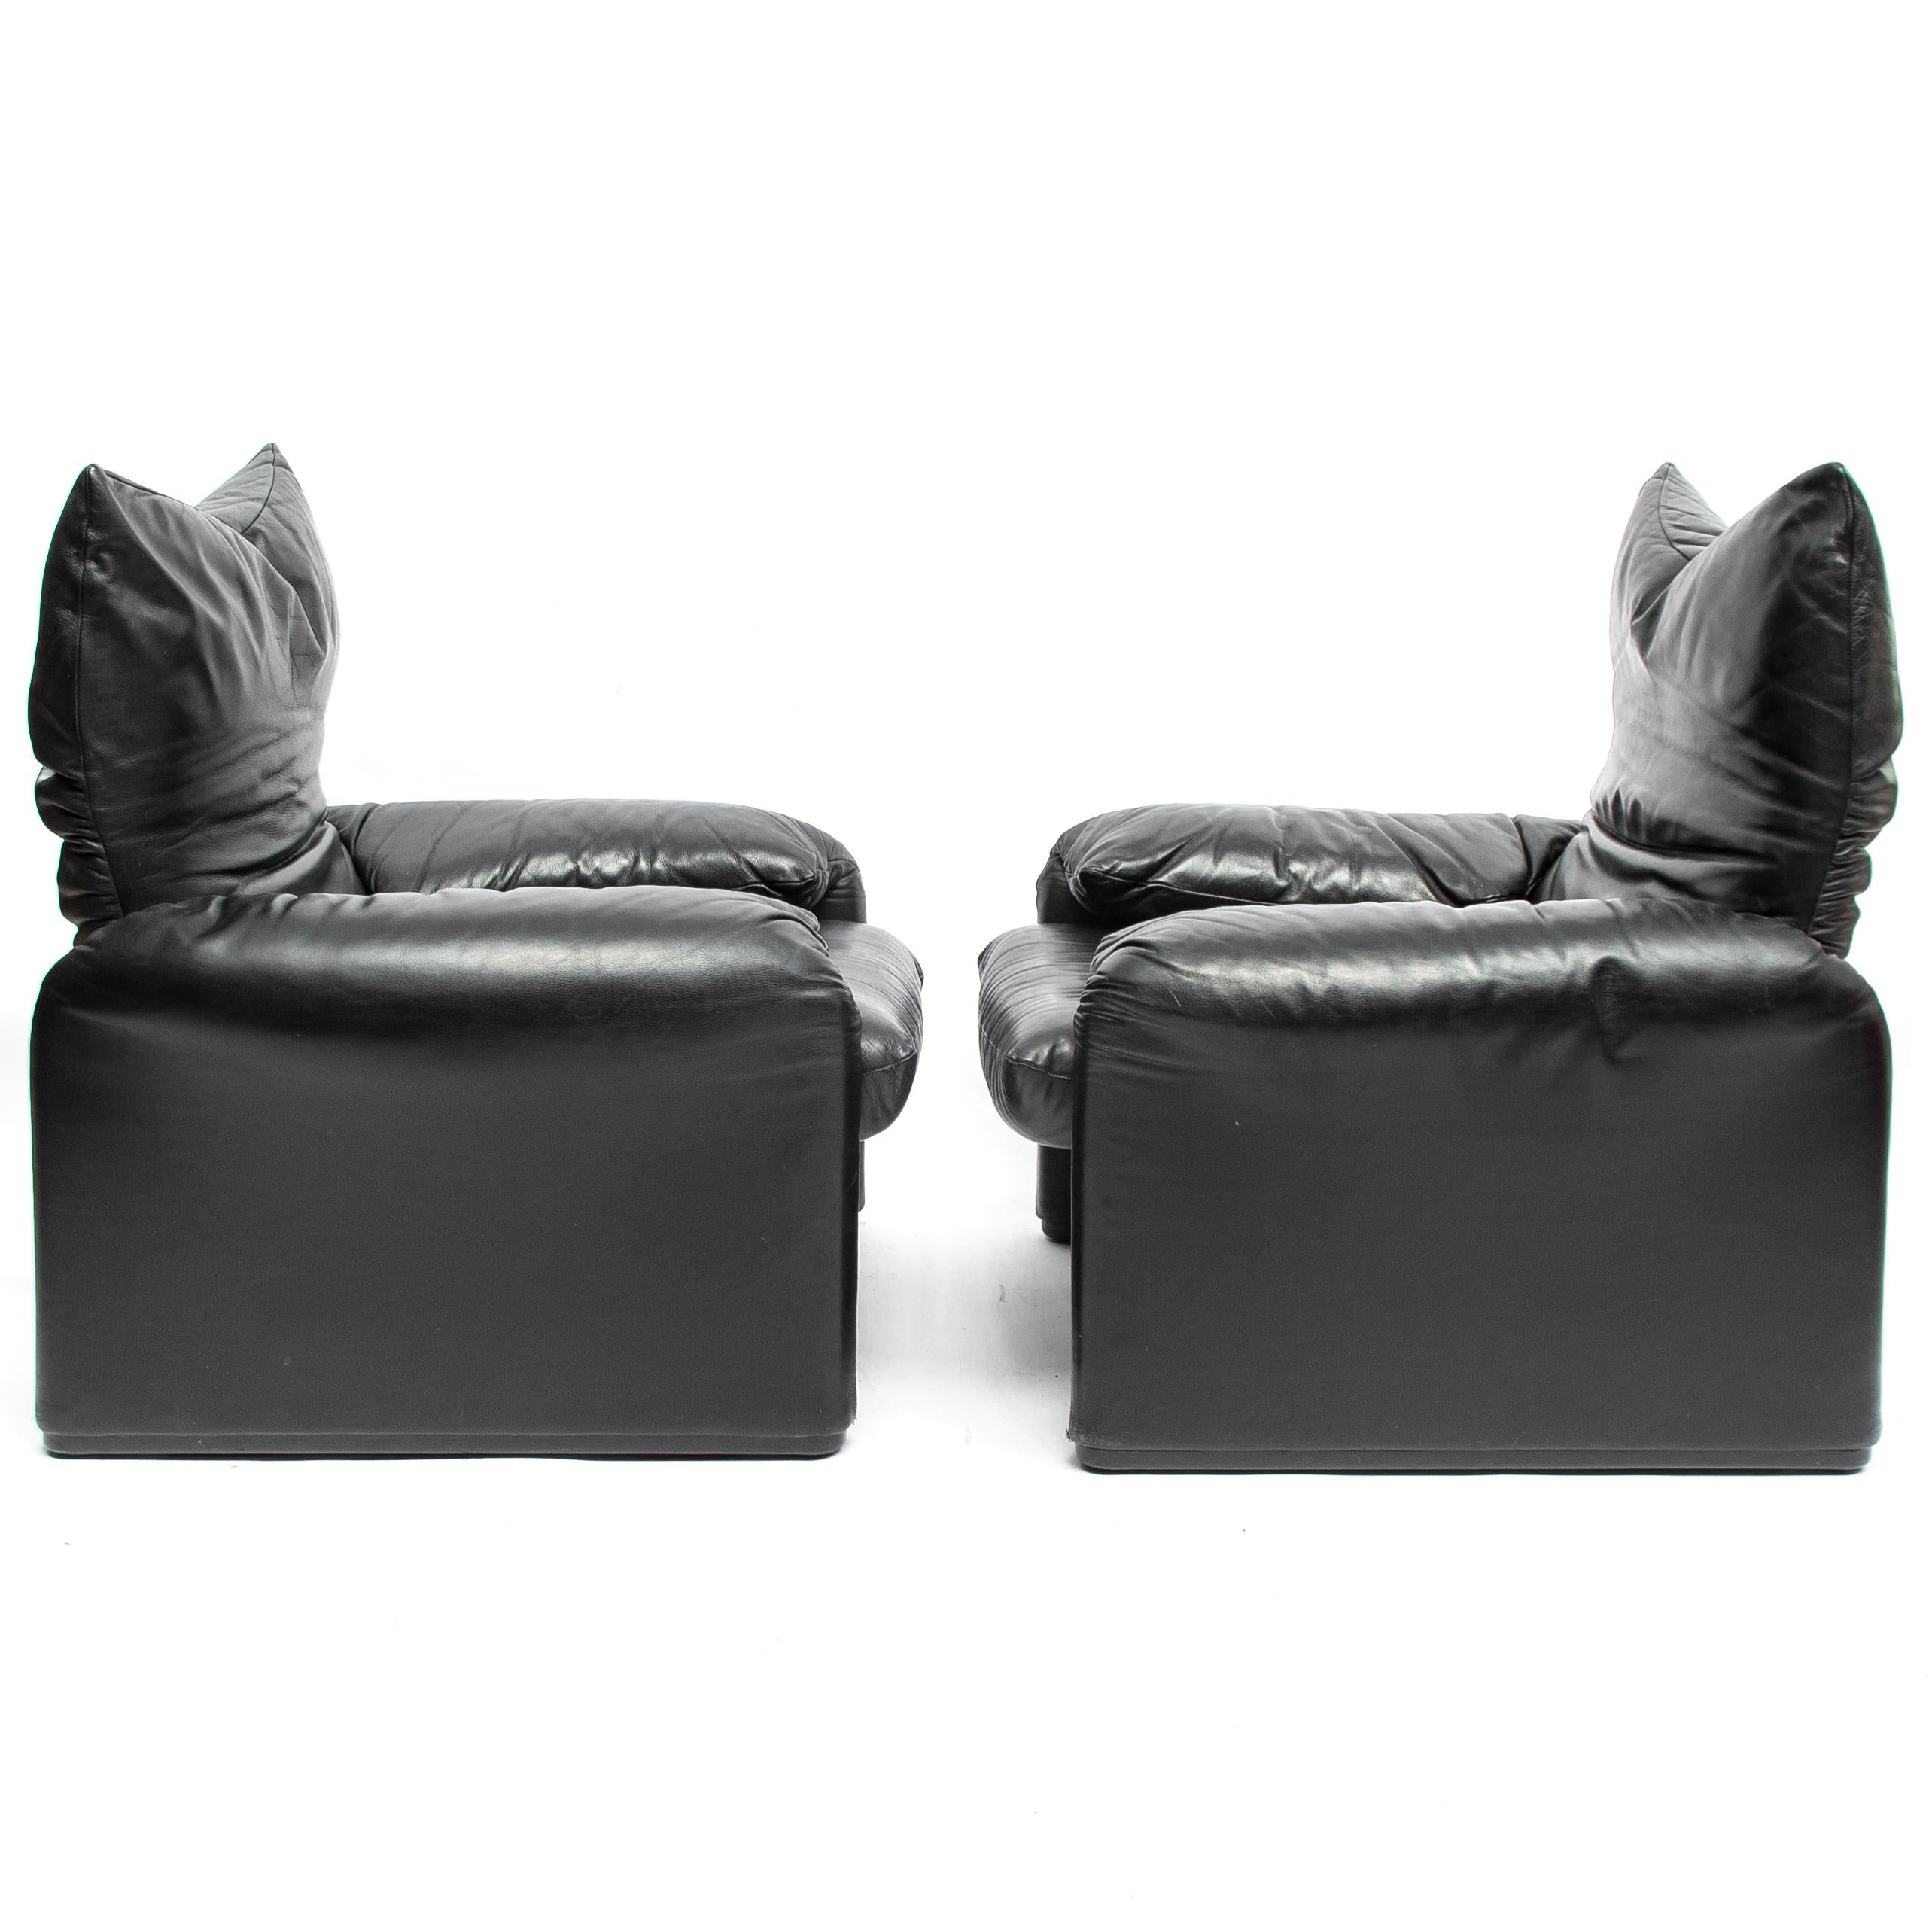 Italian Pair of “Maralunga” Lounge Chairs by Vico Magistretti for Cassina, 1970s